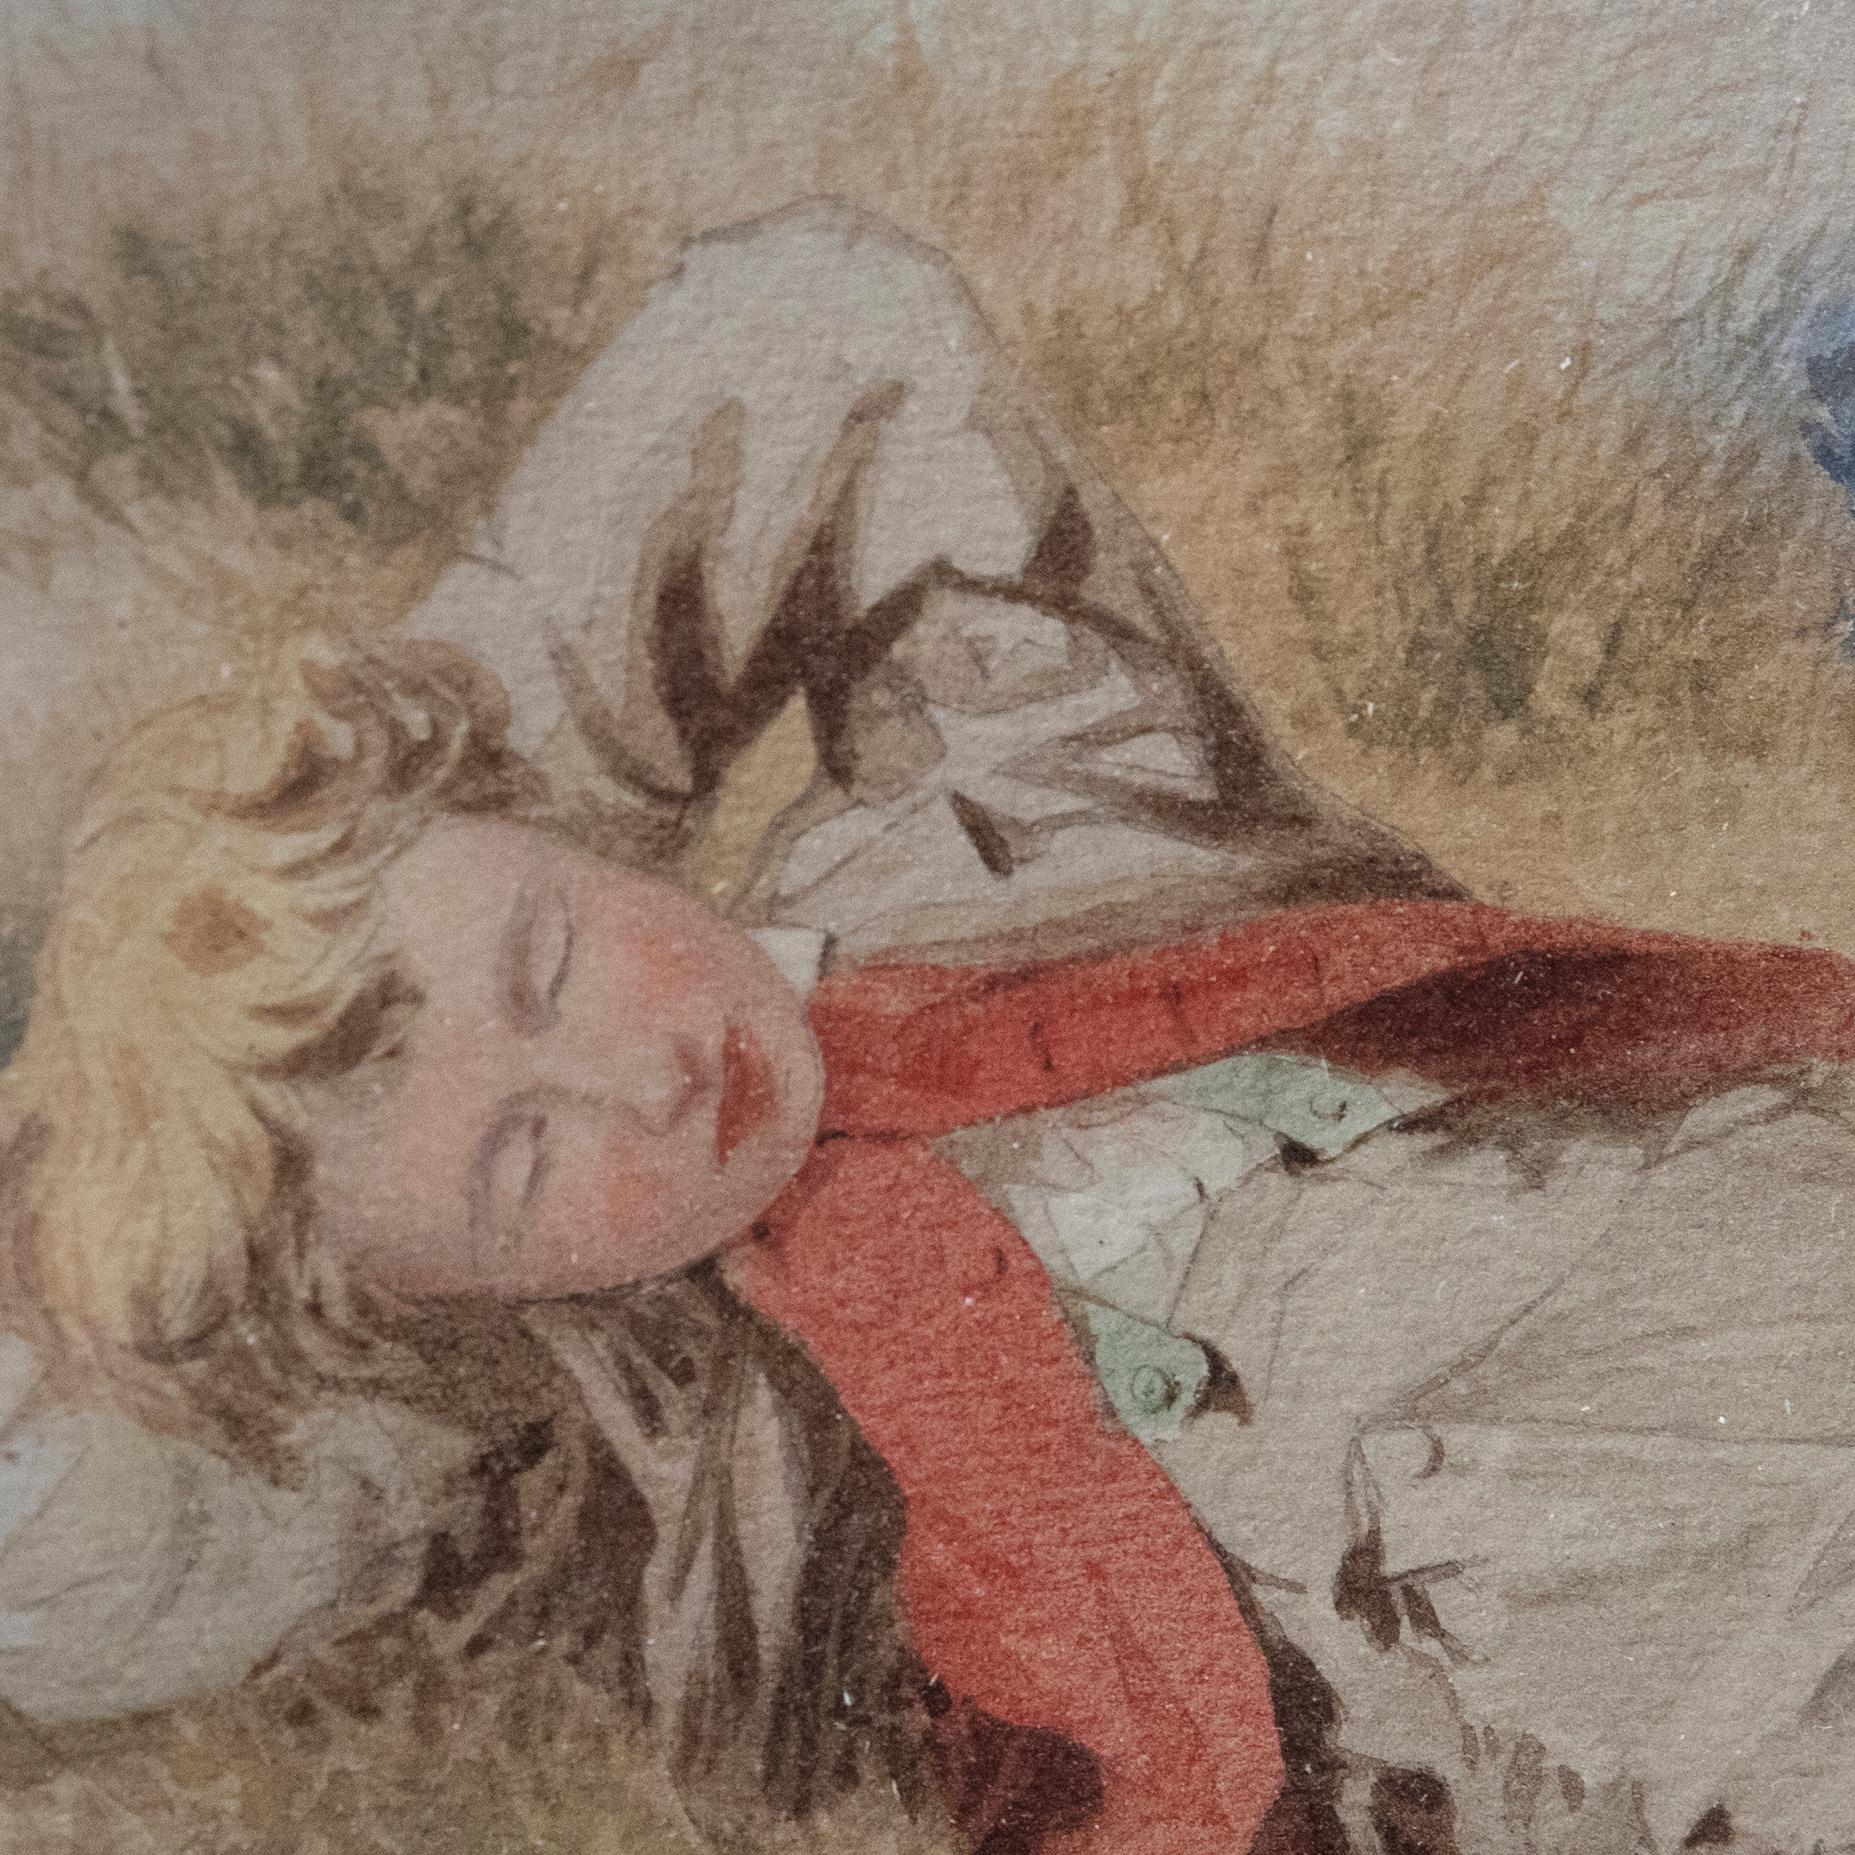 A charming watercolour scene depicting a sleeping boy on the verge of a lake. Unsigned. Well presented in an oval frame with a beaded running pattern and acanthus details. On paper.